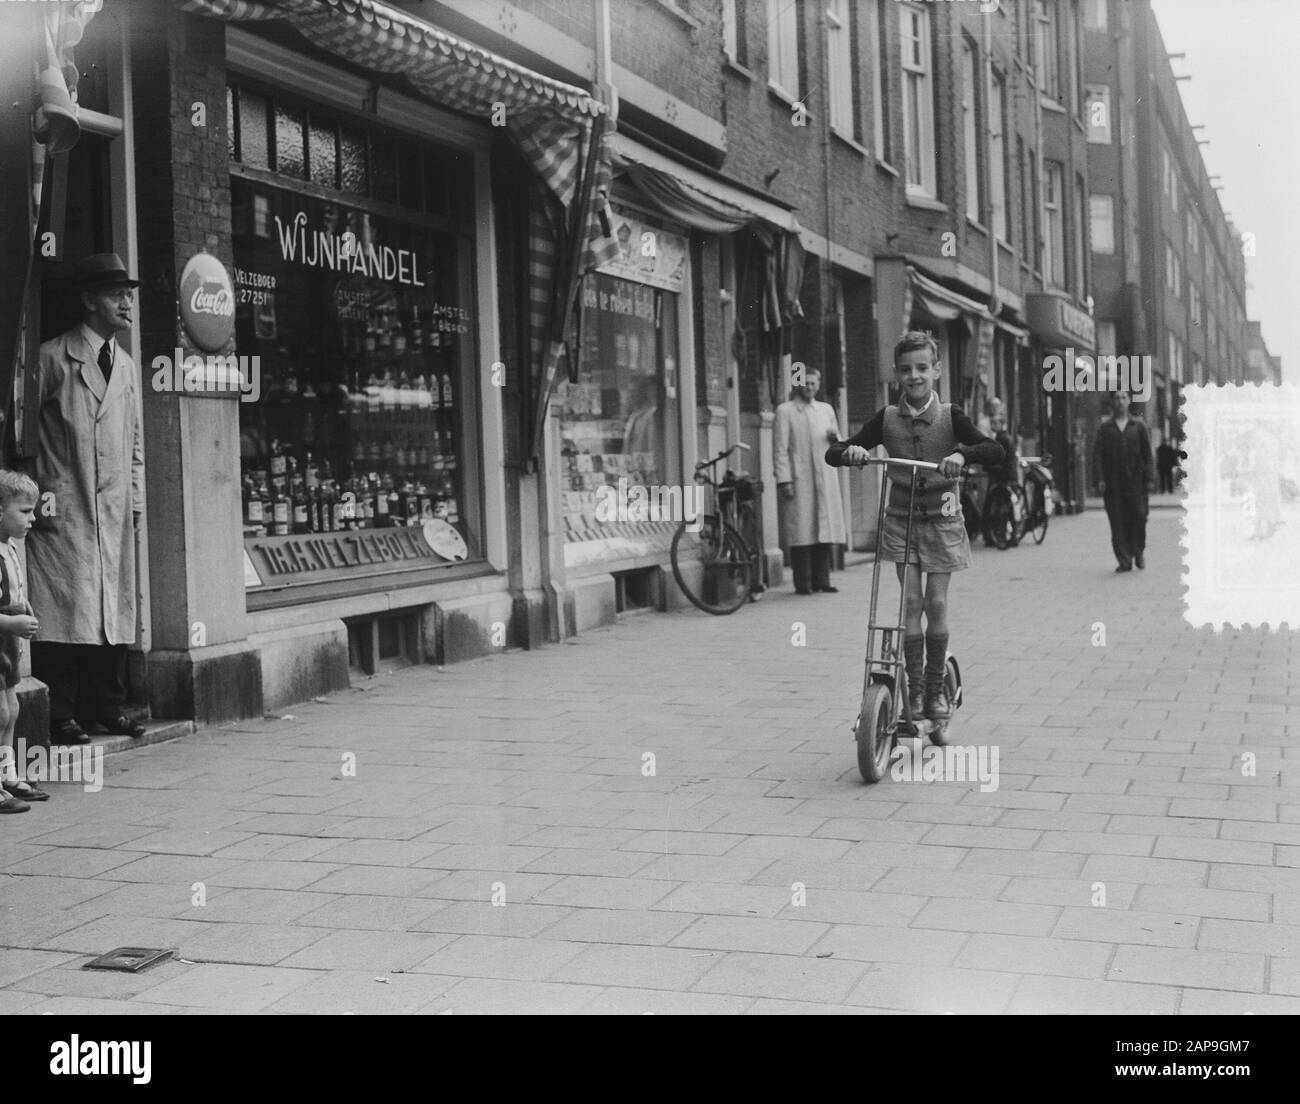 Autoped with handlebar movable for movement Date: 24 July 1951 Location: Amsterdam Keywords: autopeds Stock Photo